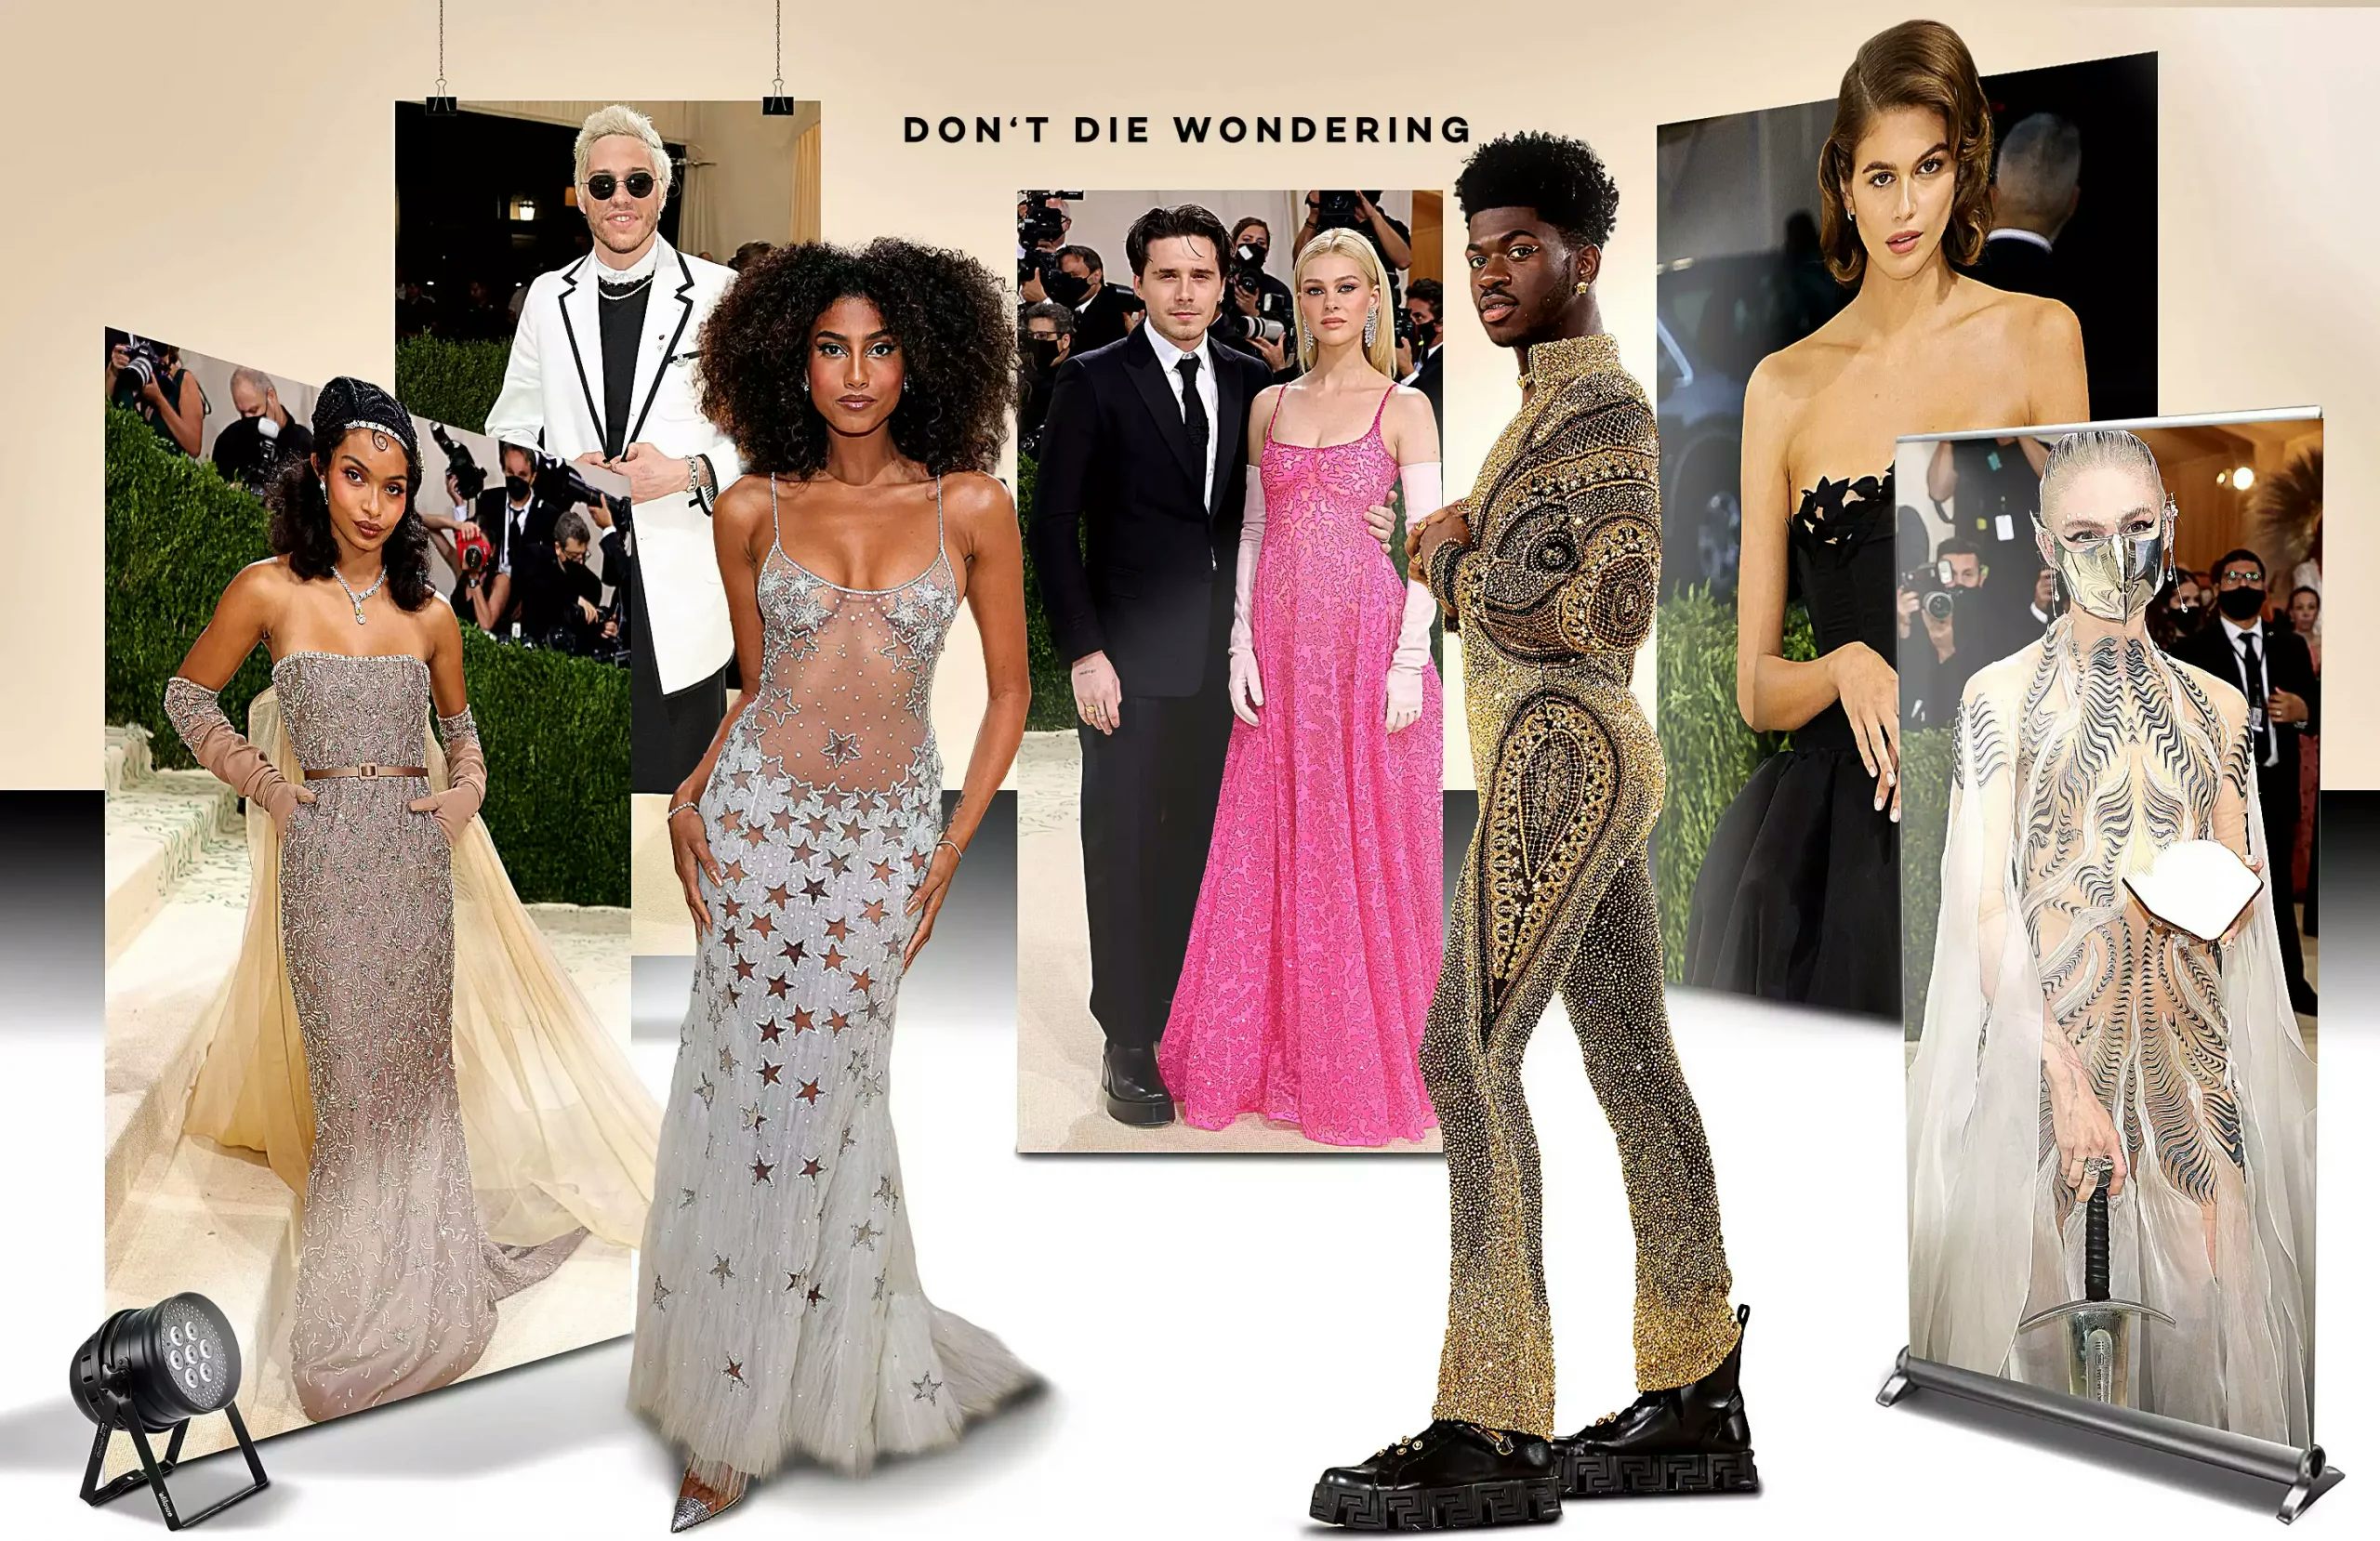 Met Gala 2021: The Guests, The Designers, The Looks